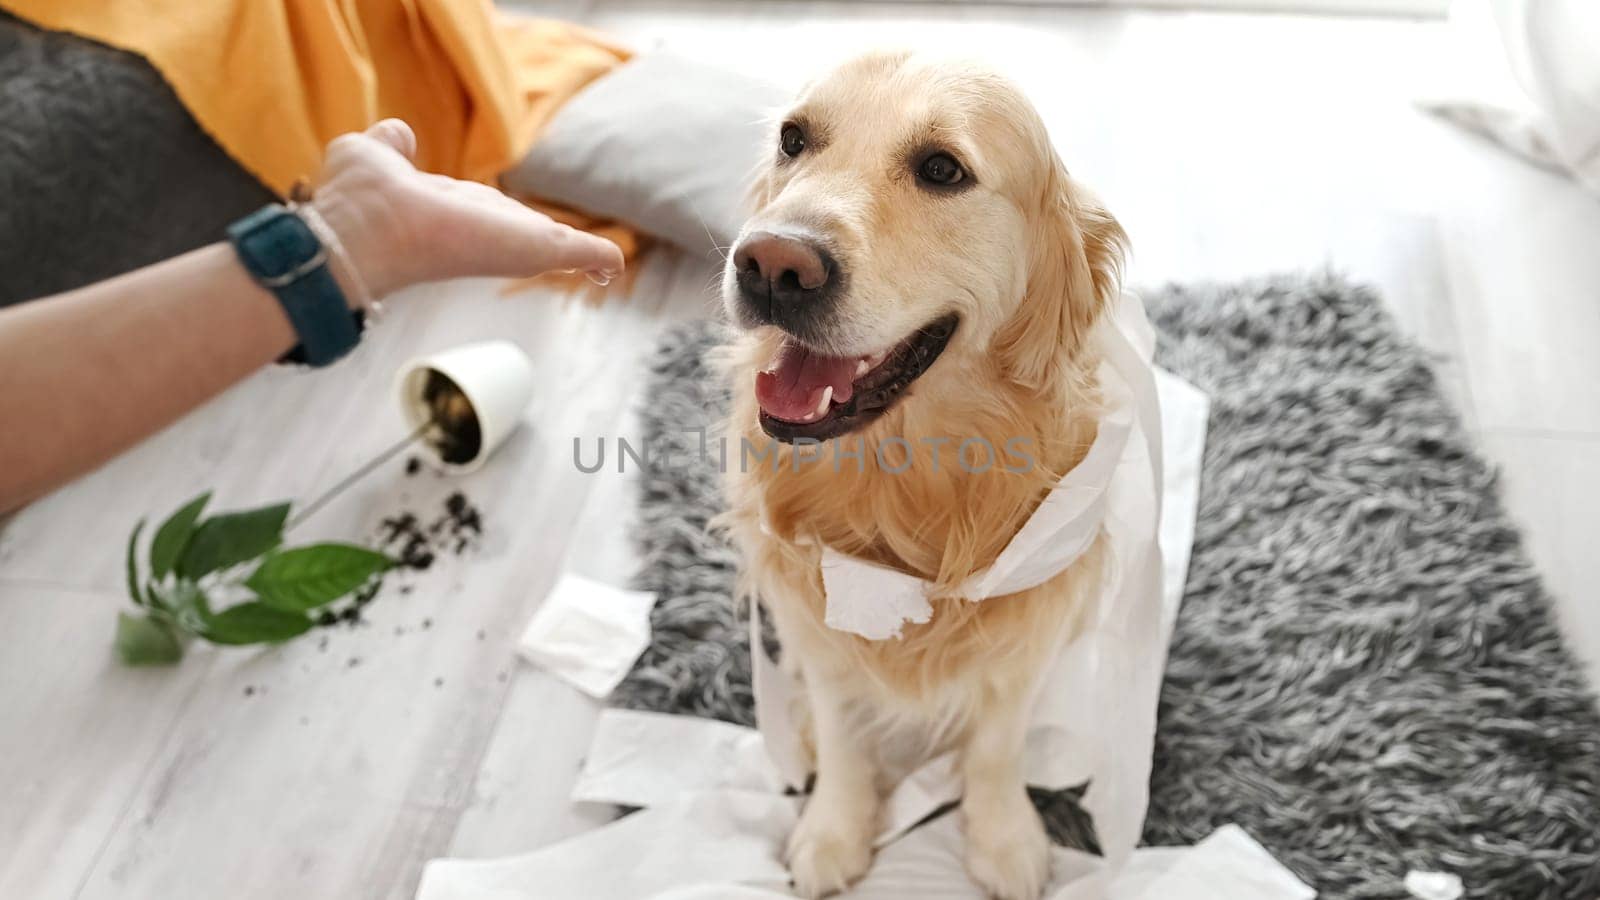 Golden retriever dog looking guilty at girl owner after playing with toilet paper in living room. Woman scolds pet doggy for mess with tissue paper at home